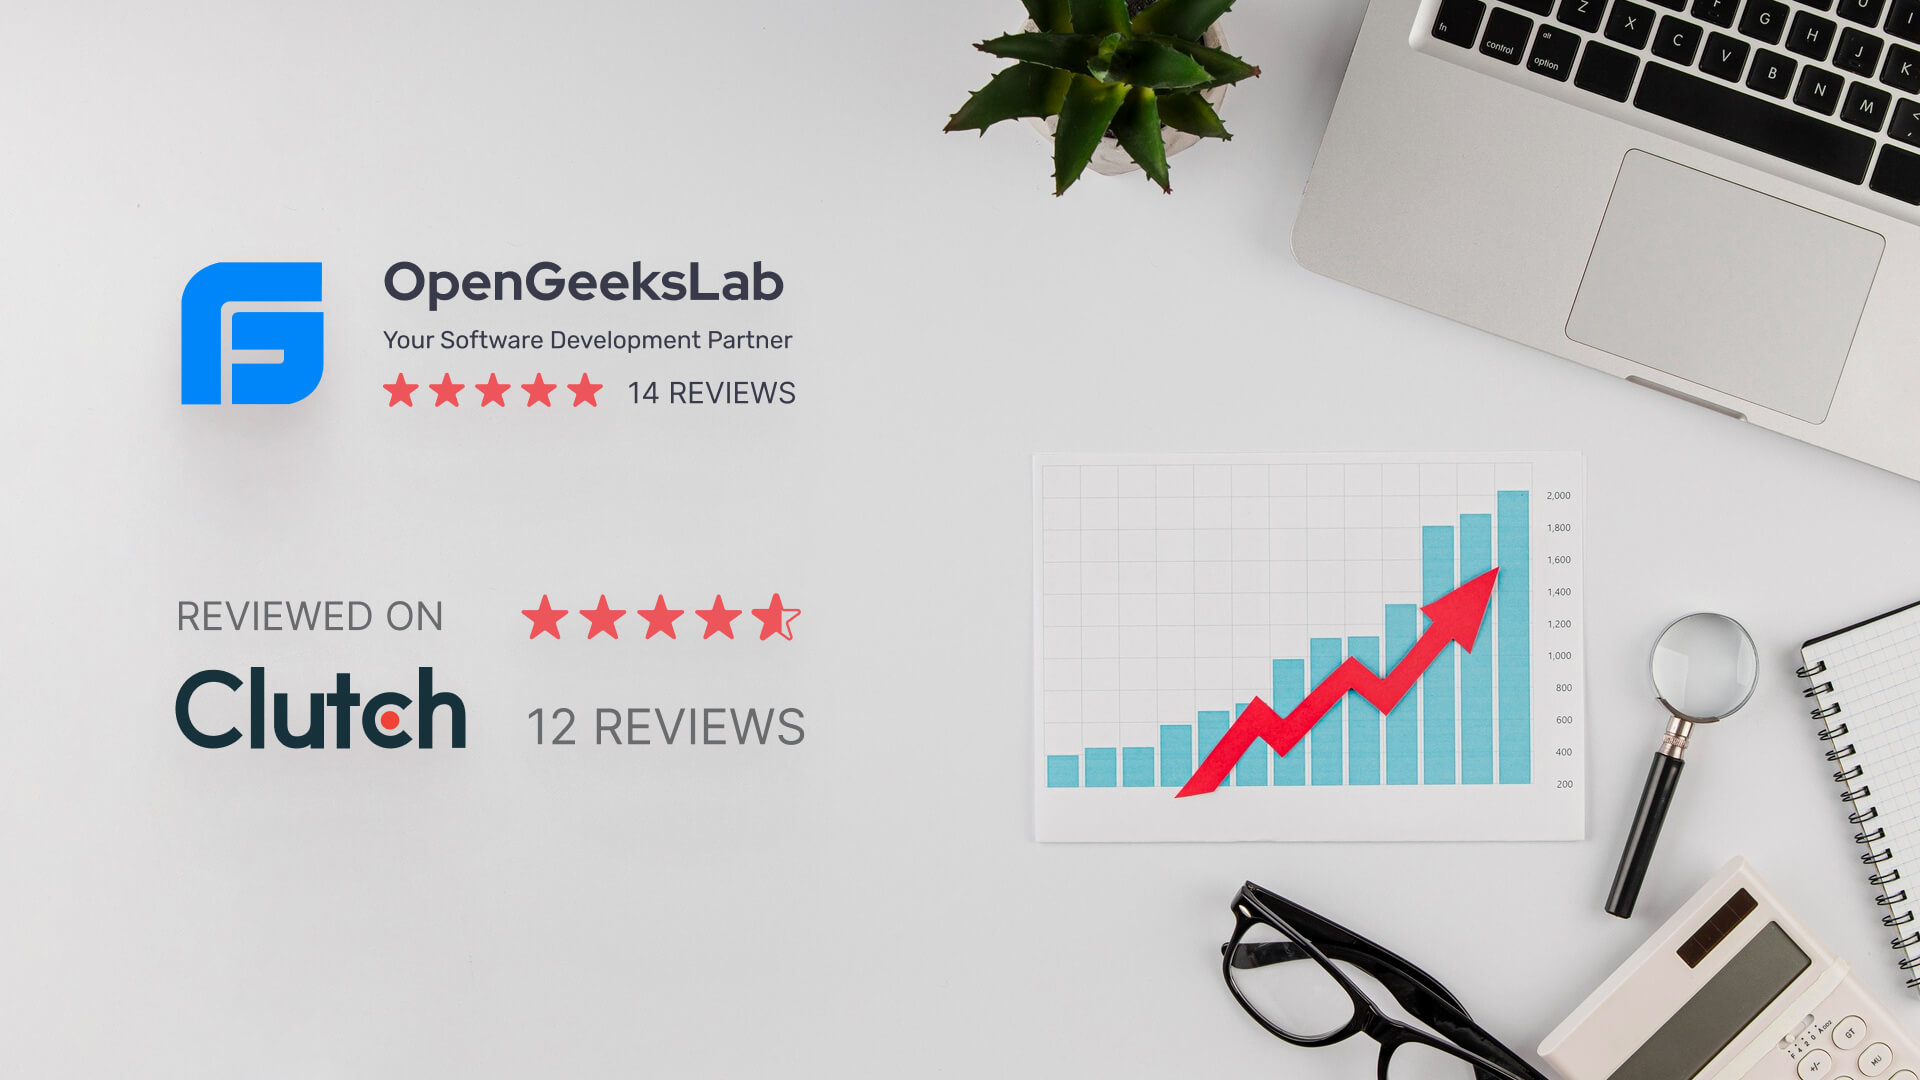 OpenGeeksLab proudly ranked among Clutch's elite selection of leading cross-platform app developers.